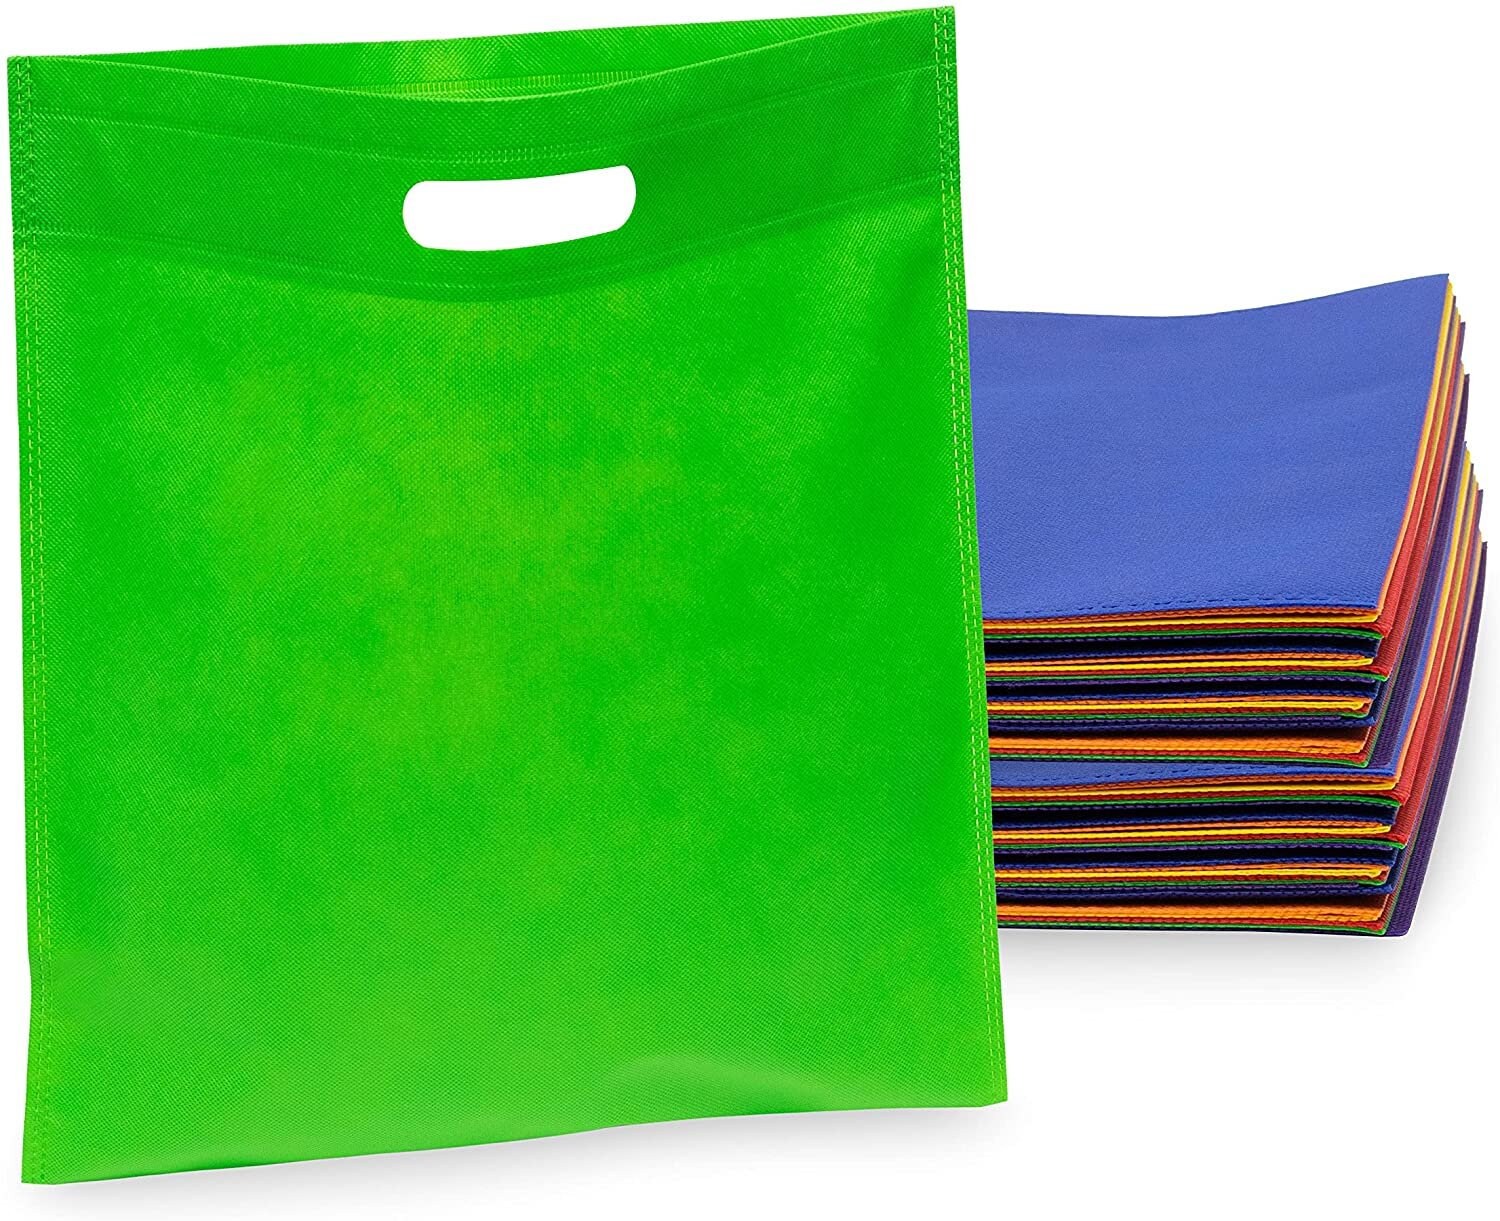 Large Recyclable Die Cut Plastic Bag / Plastic Bags / Holden Bags